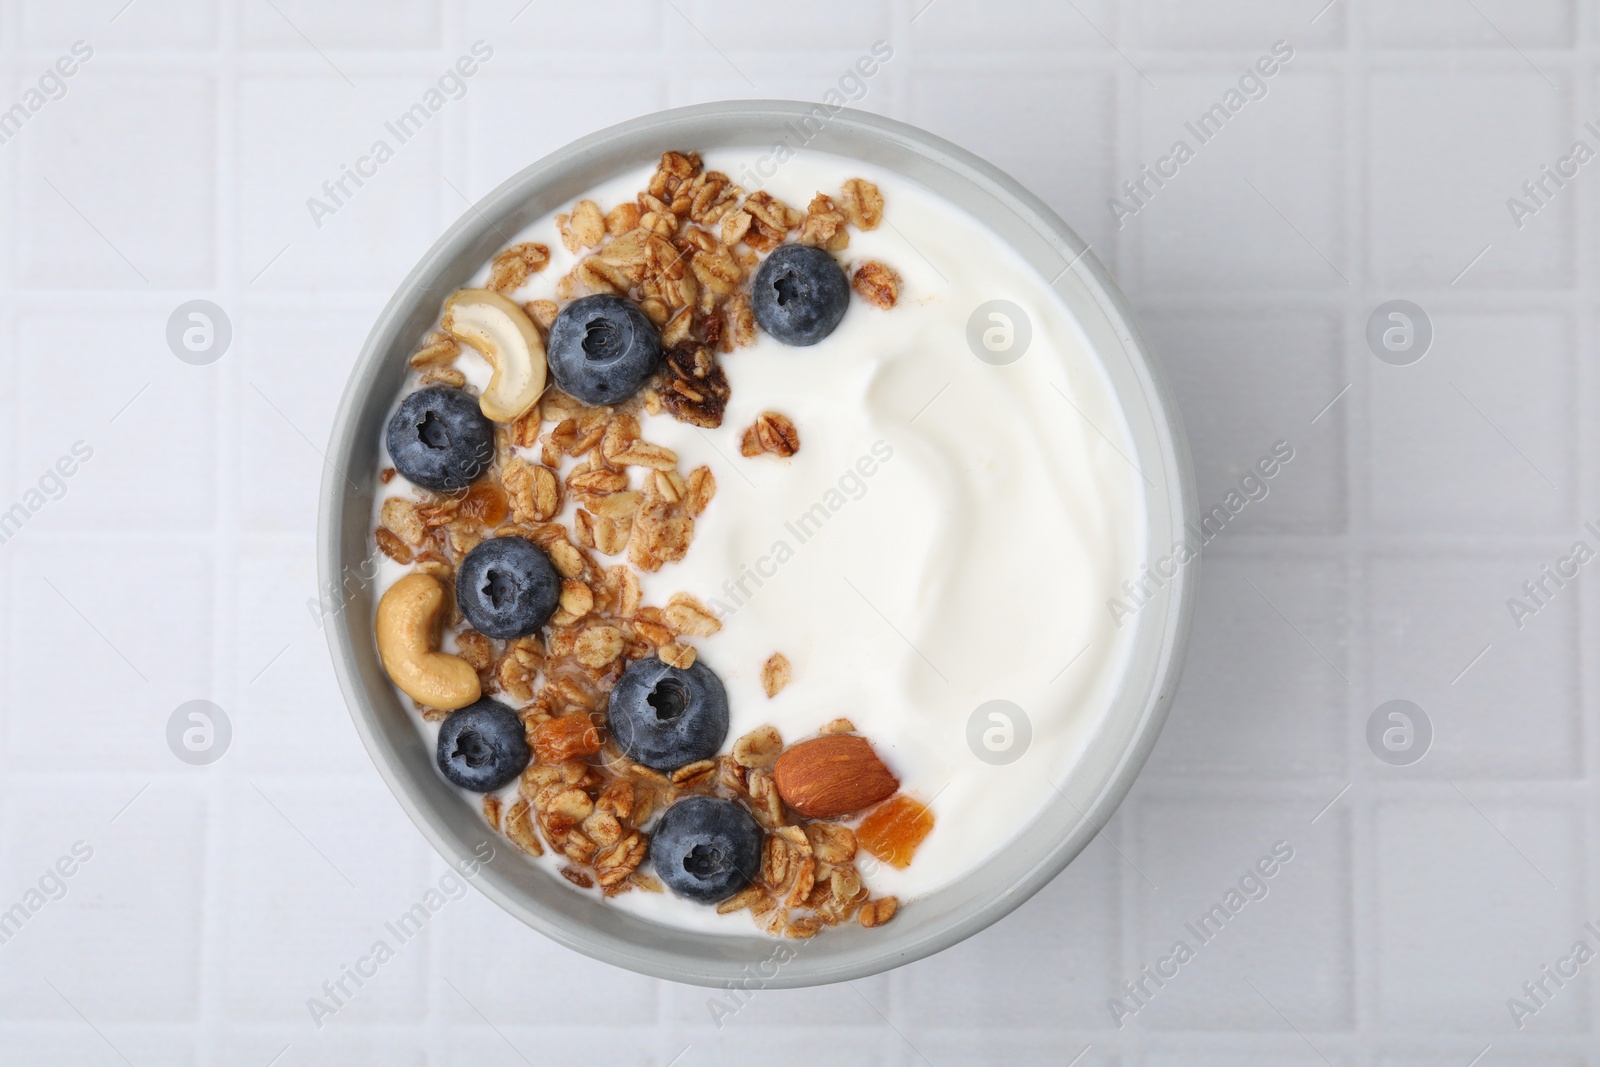 Photo of Bowl with yogurt, blueberries and granola on white tiled table, top view